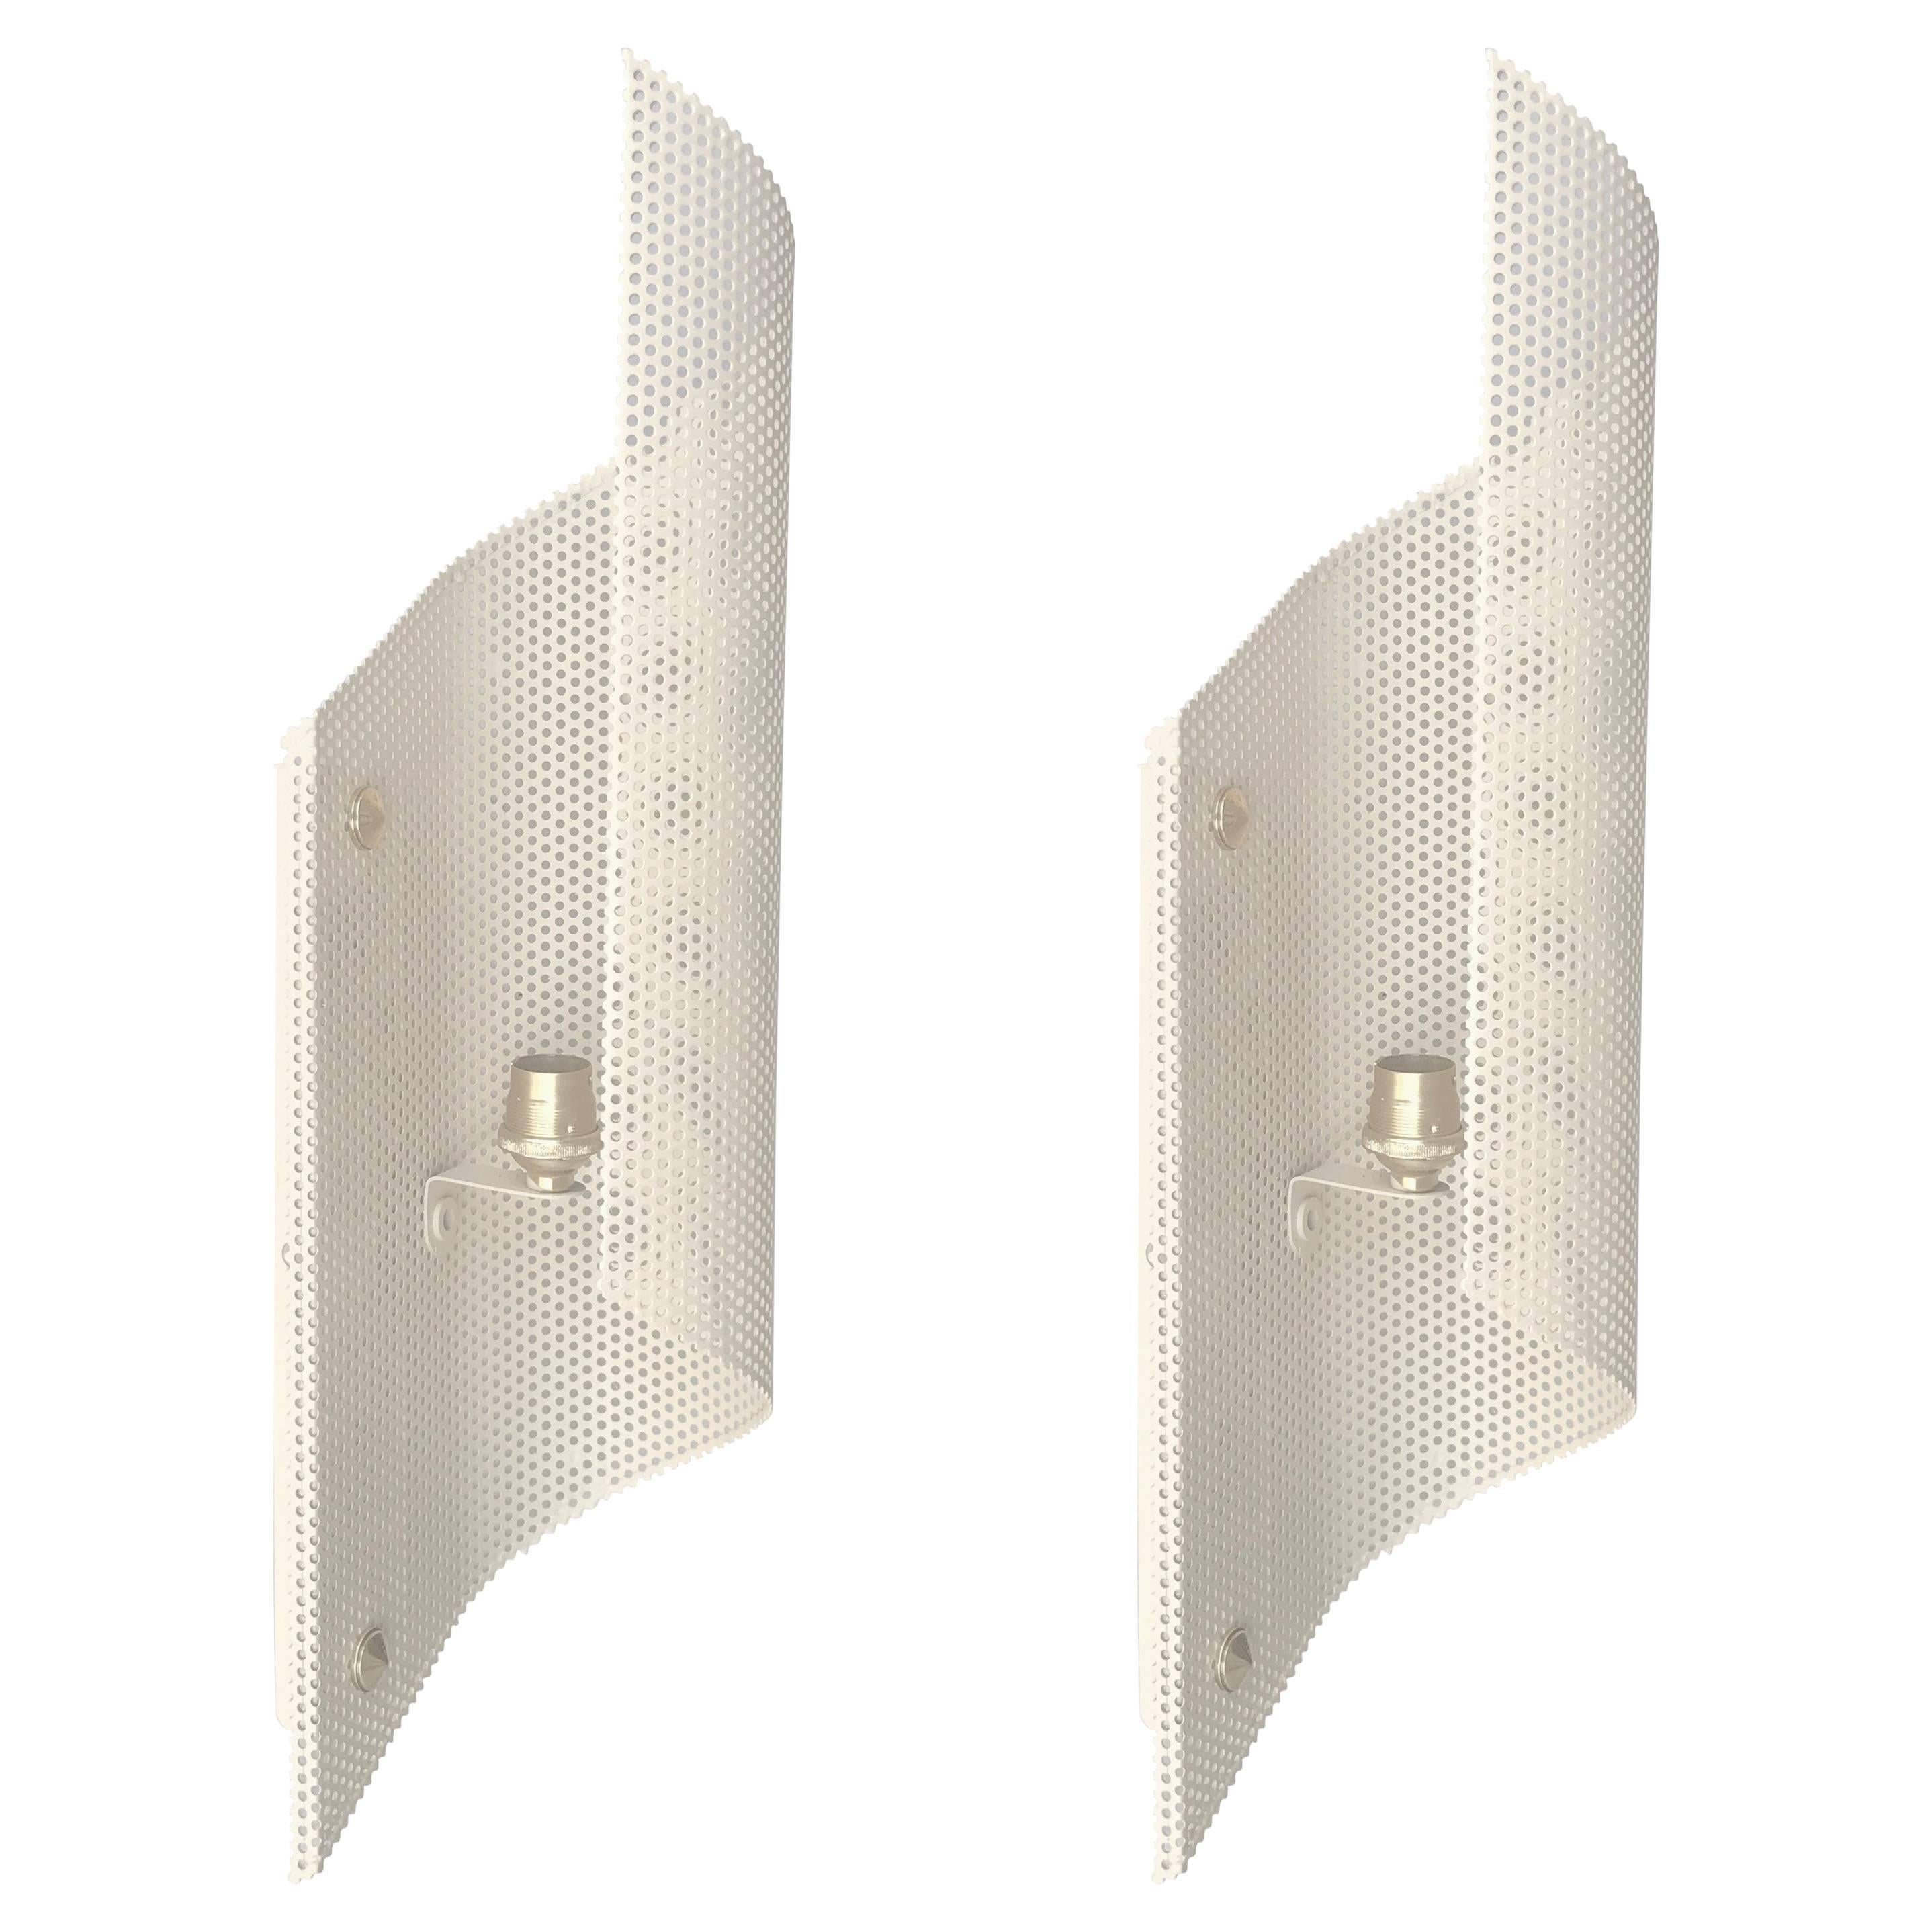 Pair of Mathieu Mategot Sconces French Mid-Century Modern  For Sale